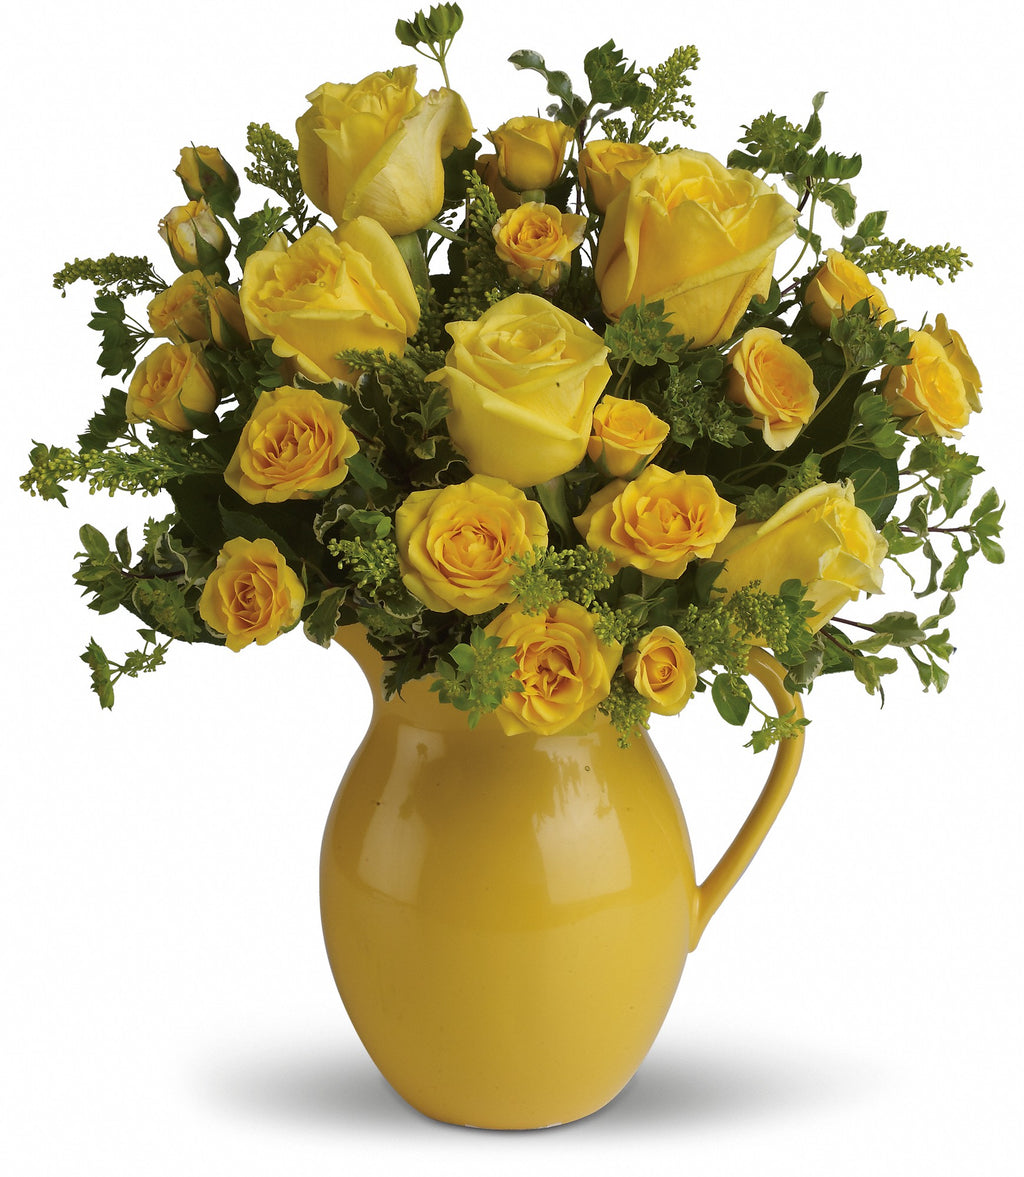 Sunny Day Pitcher of Roses Bouquet